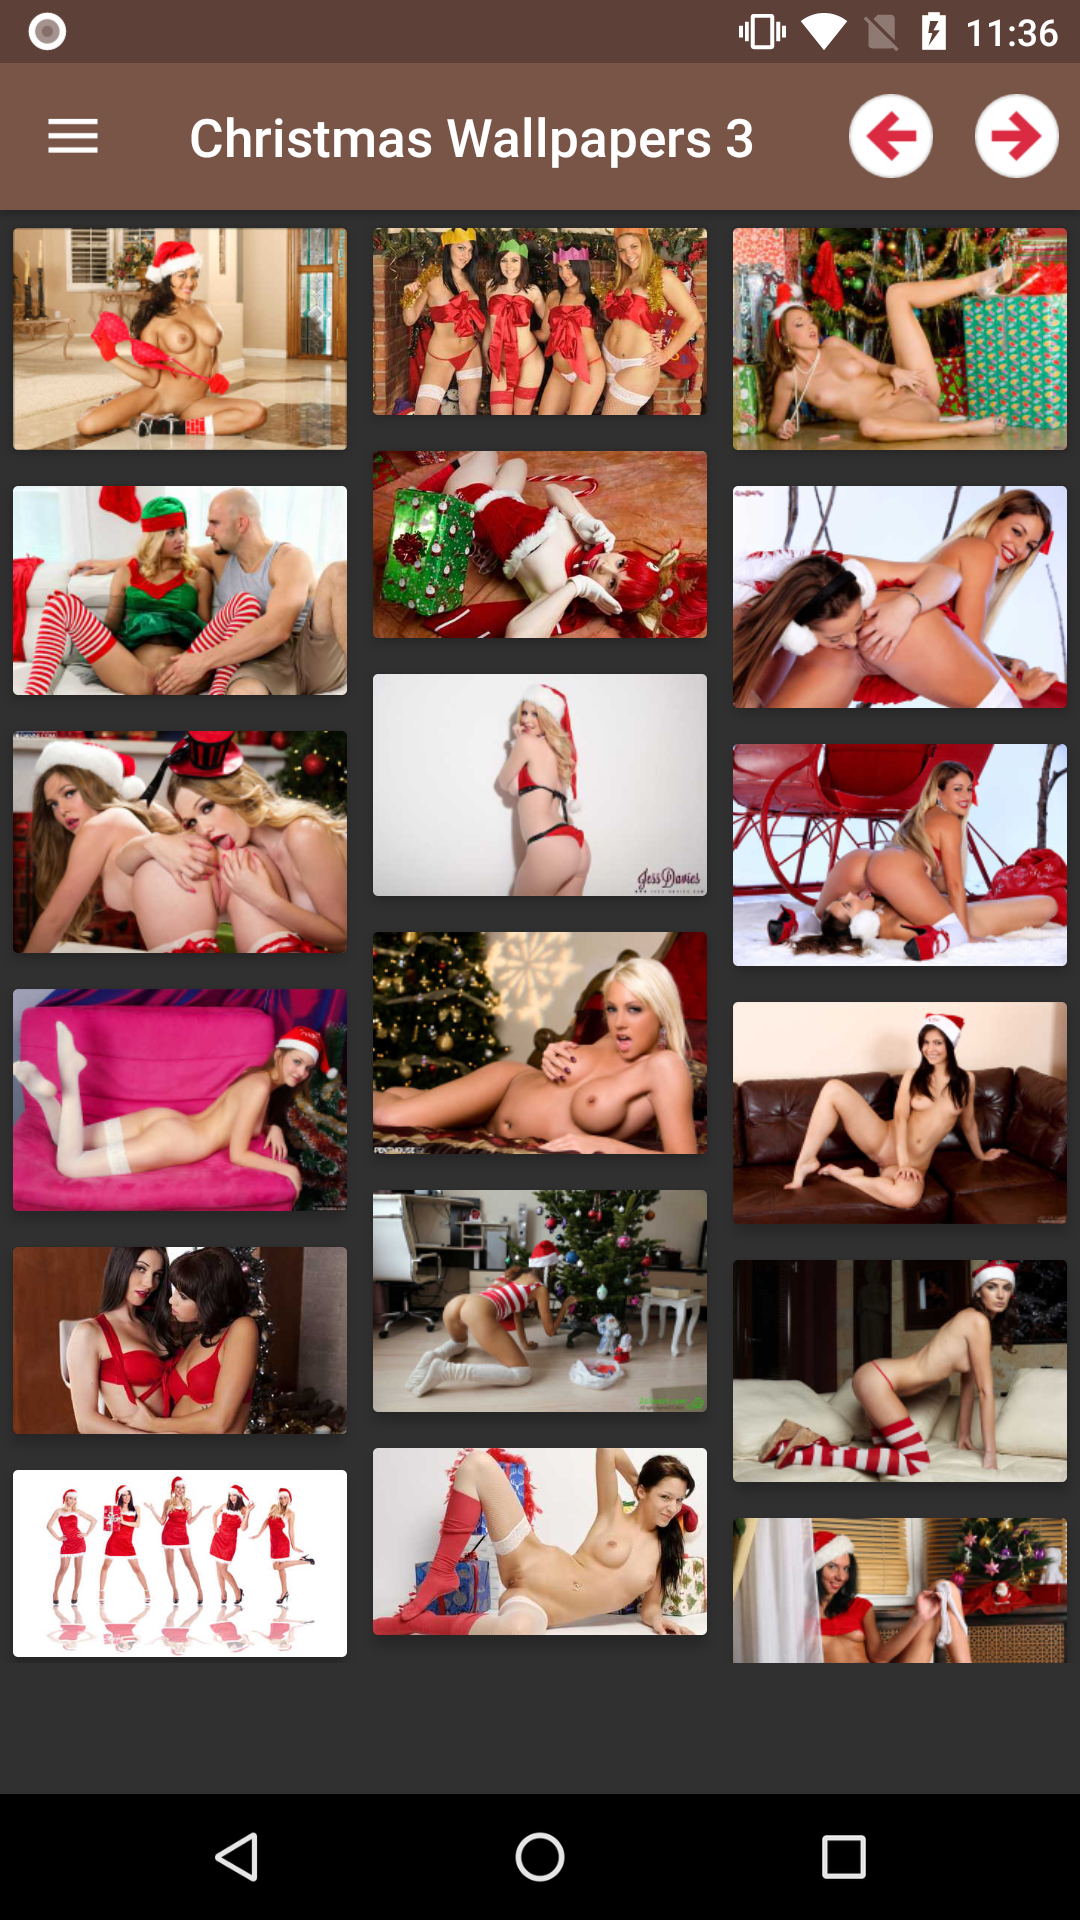 Sexy Christmas Wallpapers 2 apk,hentie,download,photo,apps,hentai,adult,erotic,wallpapers,app,sexy,pornstar,holidays,pics,heantai,photos,galleries,application,wallpaper,backgrounds,hentaipics,browser,porn